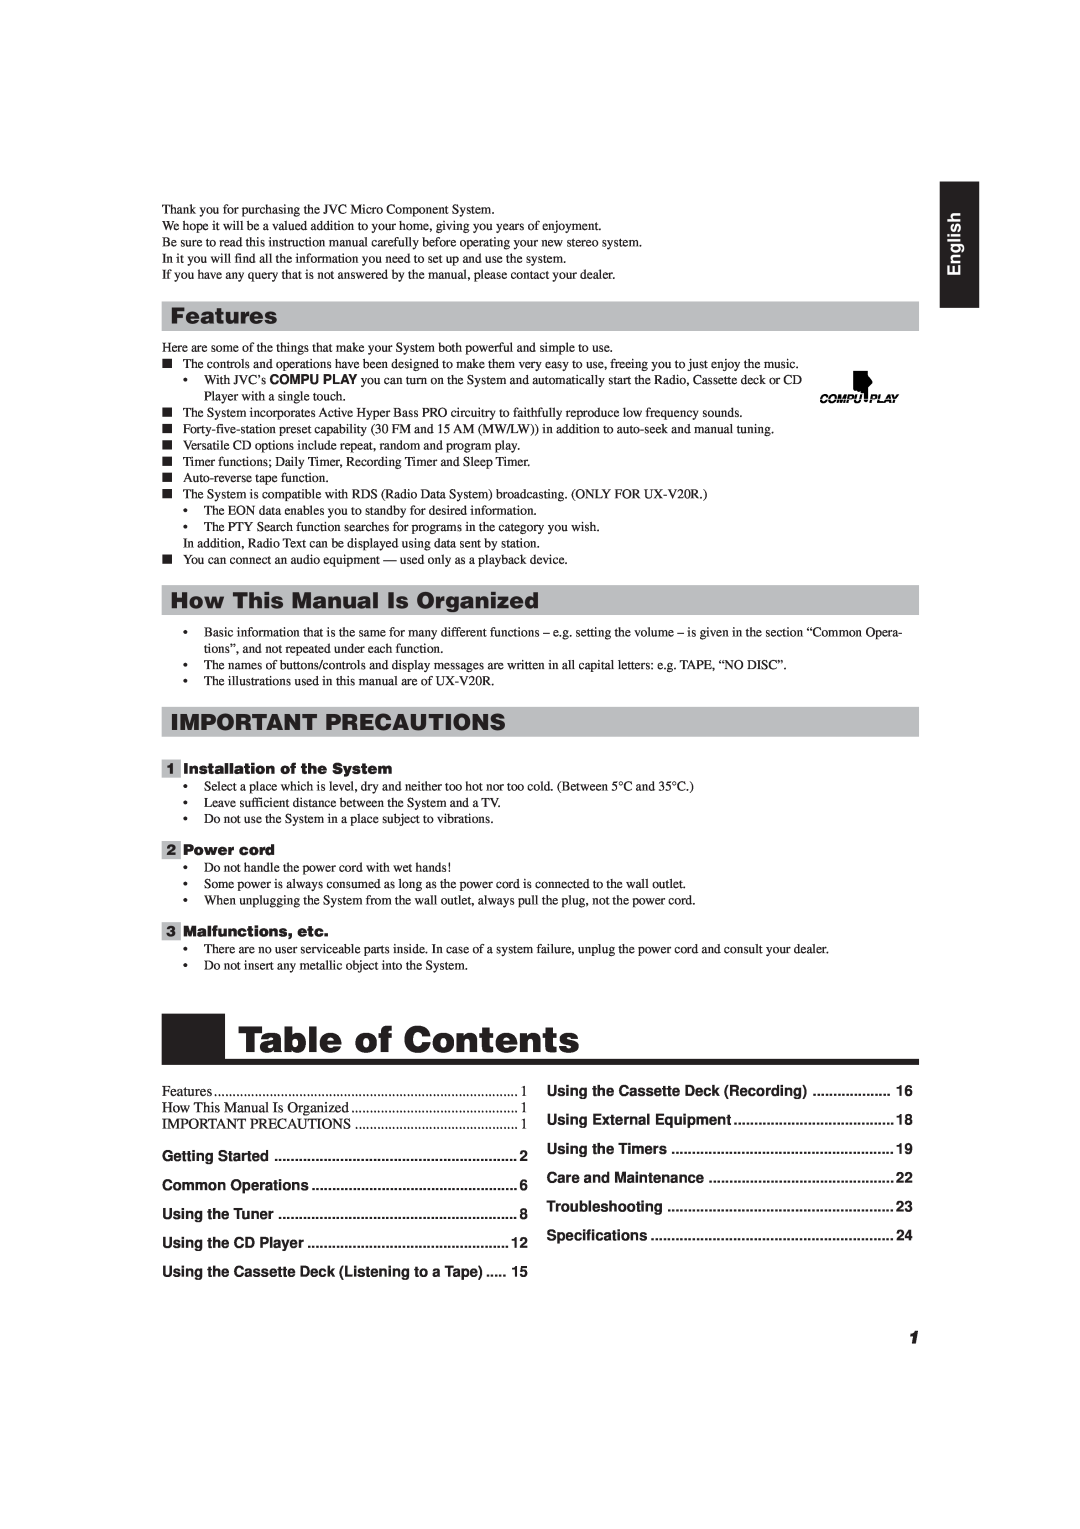 JVC UX-V10, UX-V20R manual Table of Contents, Features, How This Manual Is Organized, Important Precautions, English 